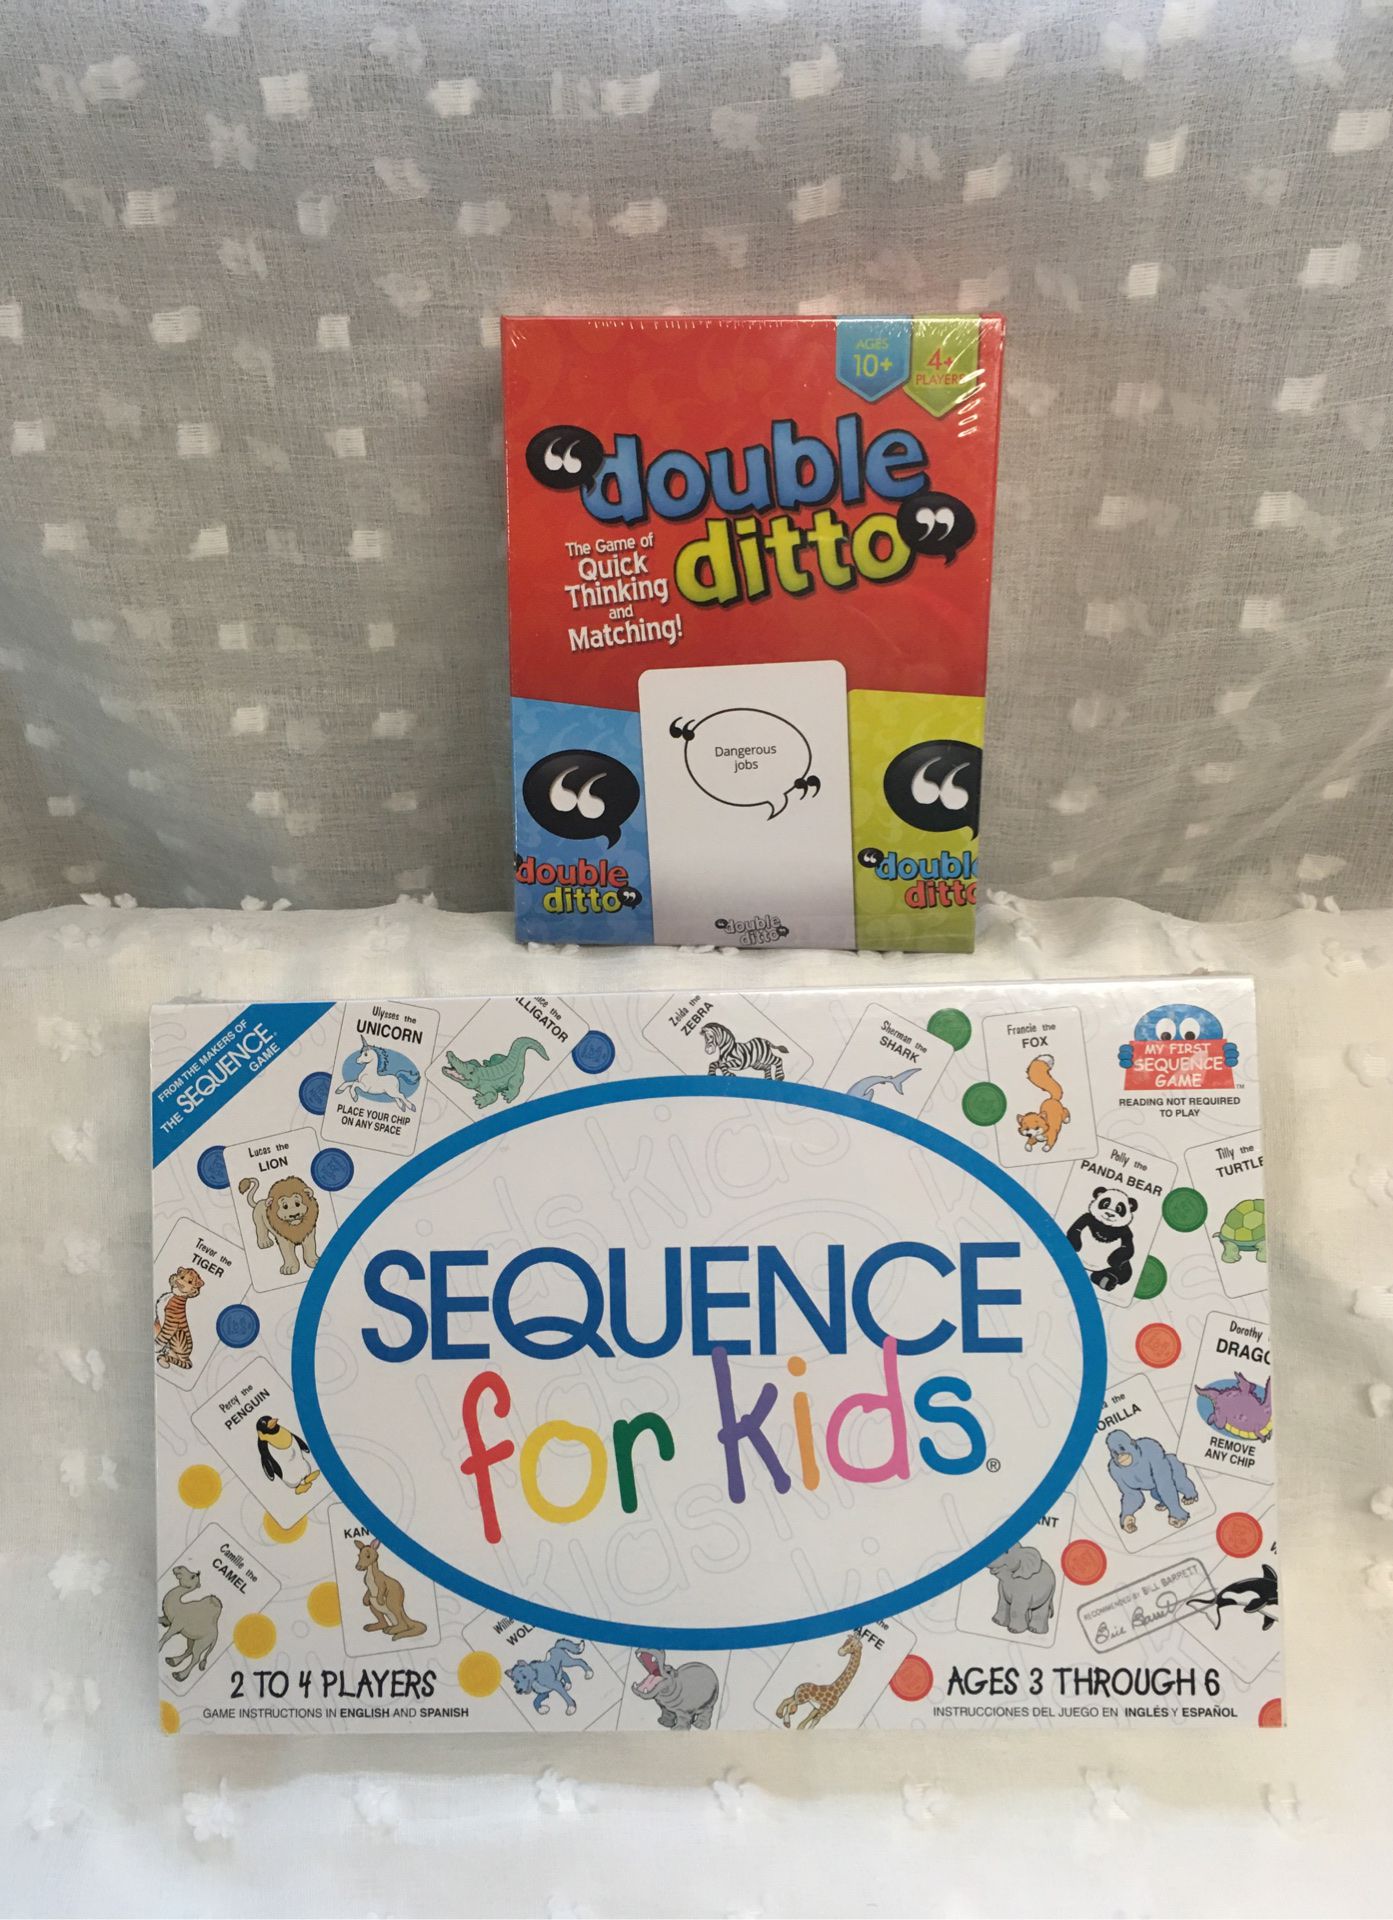 New Board Games - Sequence for Kids & Double Ditto